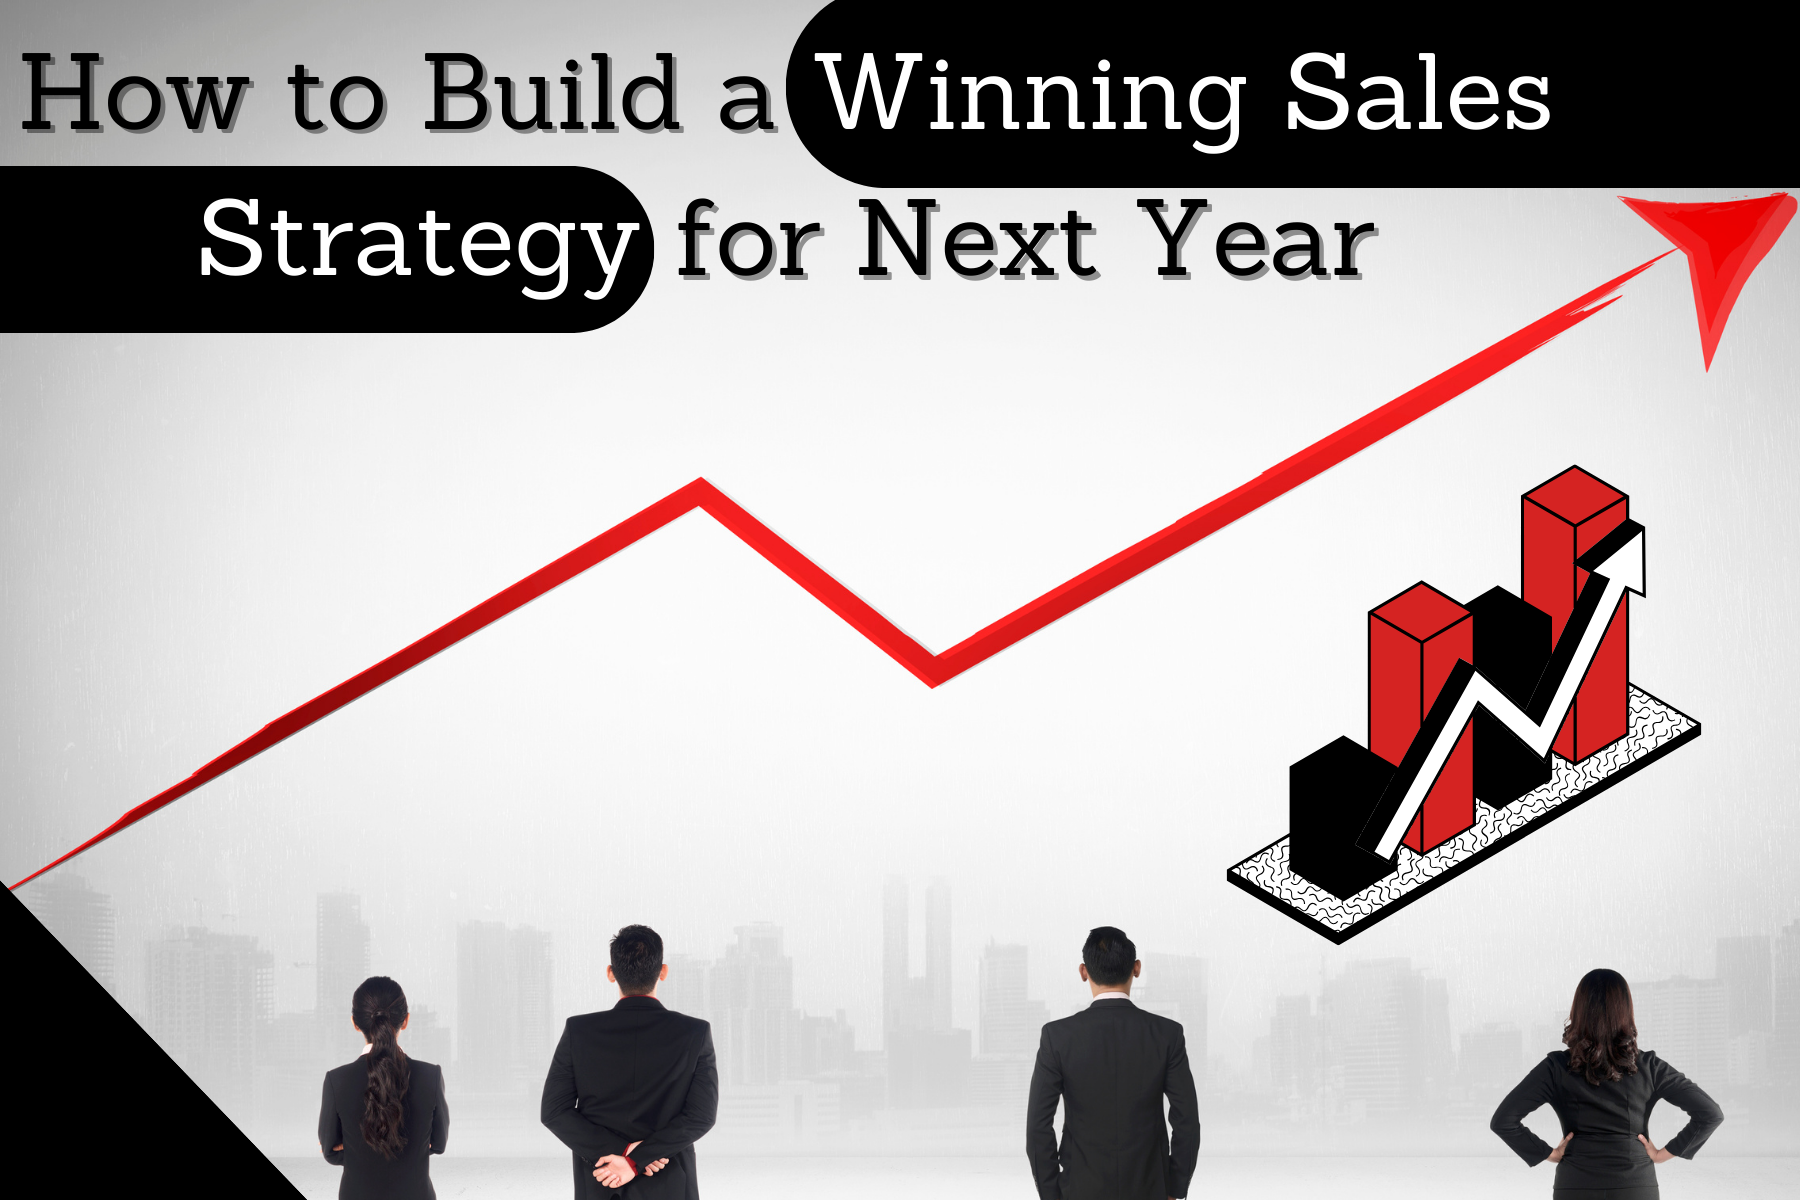 How to Build a Winning Sales Strategy for Next Year